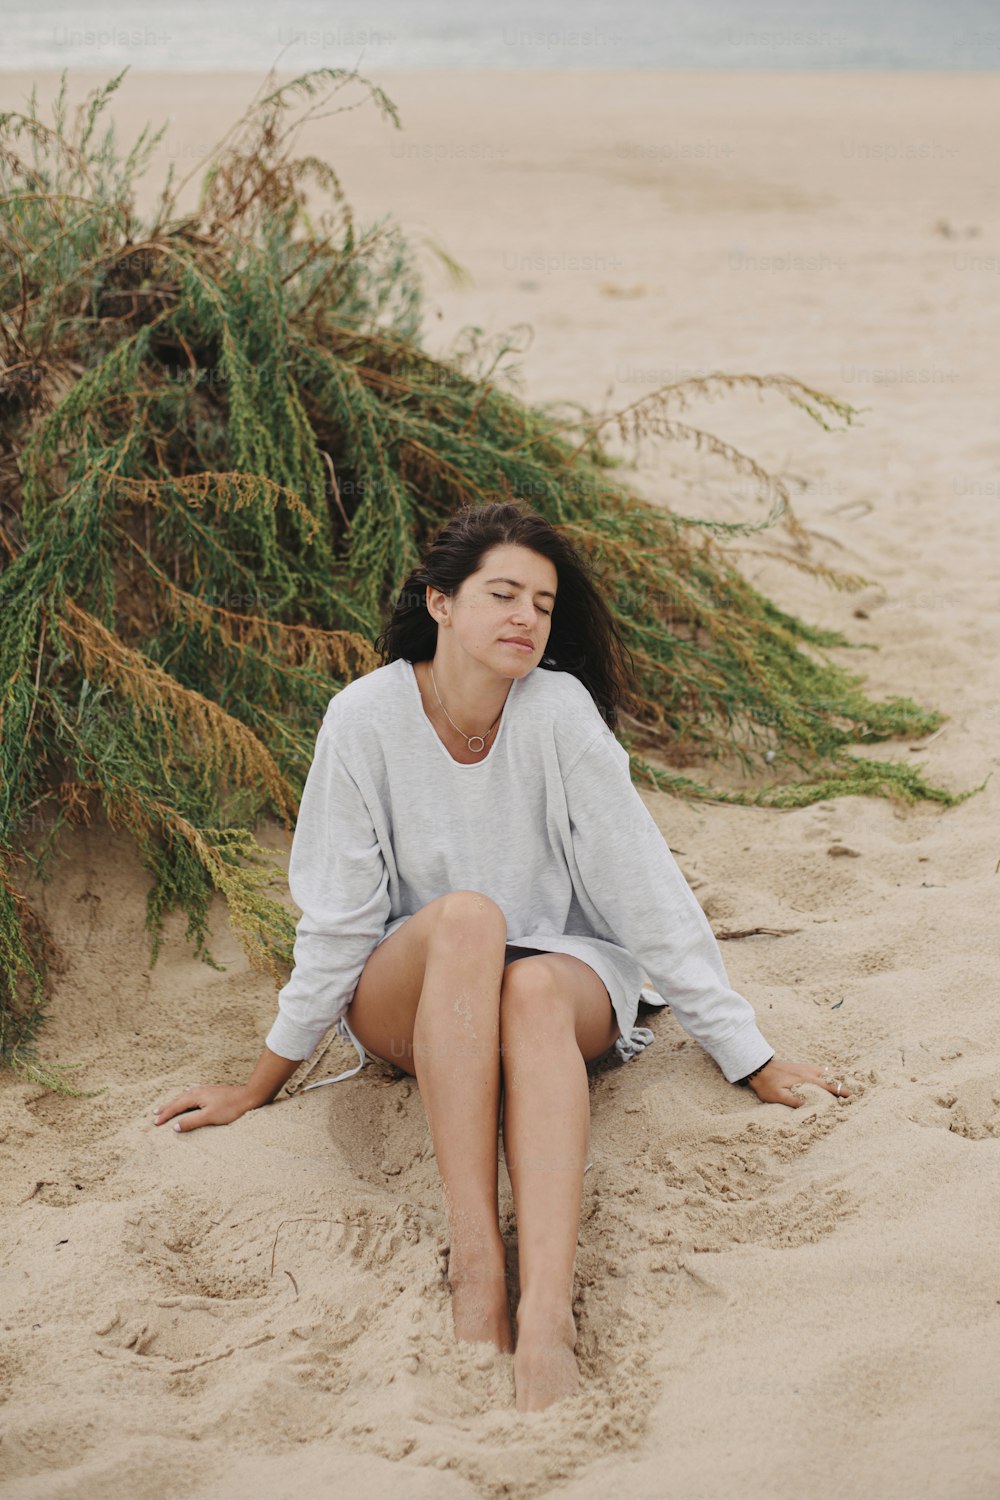 Beautiful woman with windy hair and in sweater sitting on sandy beach on background of green grass and sea, calm tranquil moment. Stylish young female relaxing on coast. Vacation mood